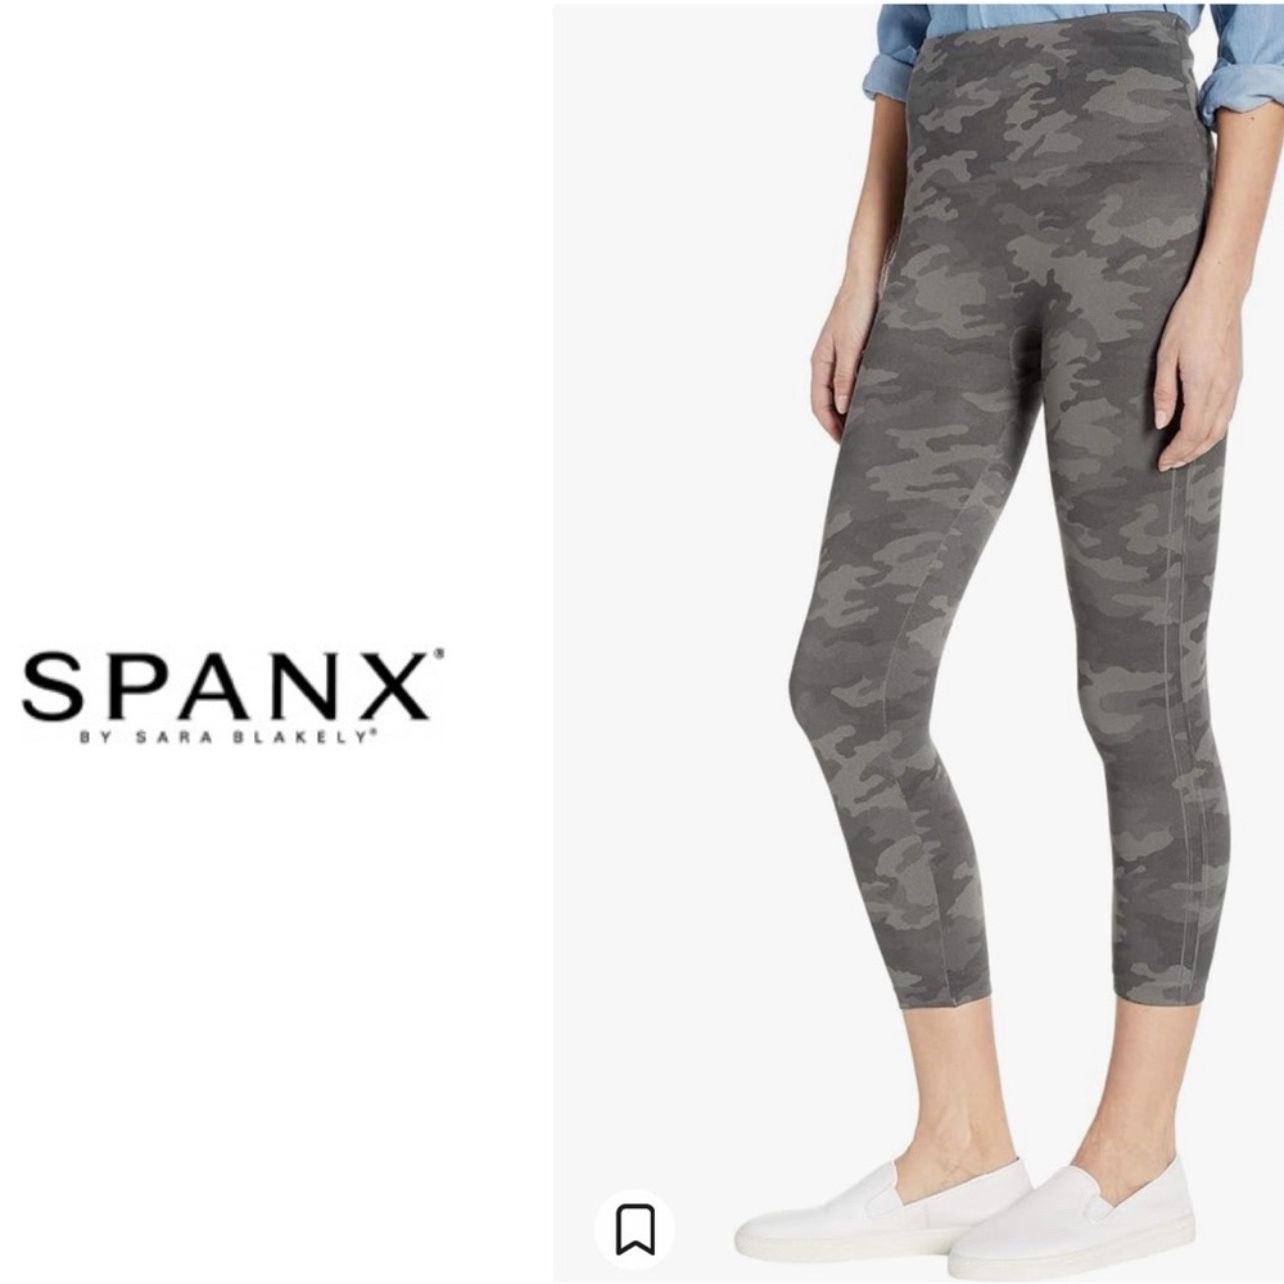 New SPANX Sage Camo Cropped Lamn Leggings Medium $68 Look At Me Now  Seamless New with tags! Ships next business day Product details Fabric type  Sh for Sale in Mesa, AZ - OfferUp